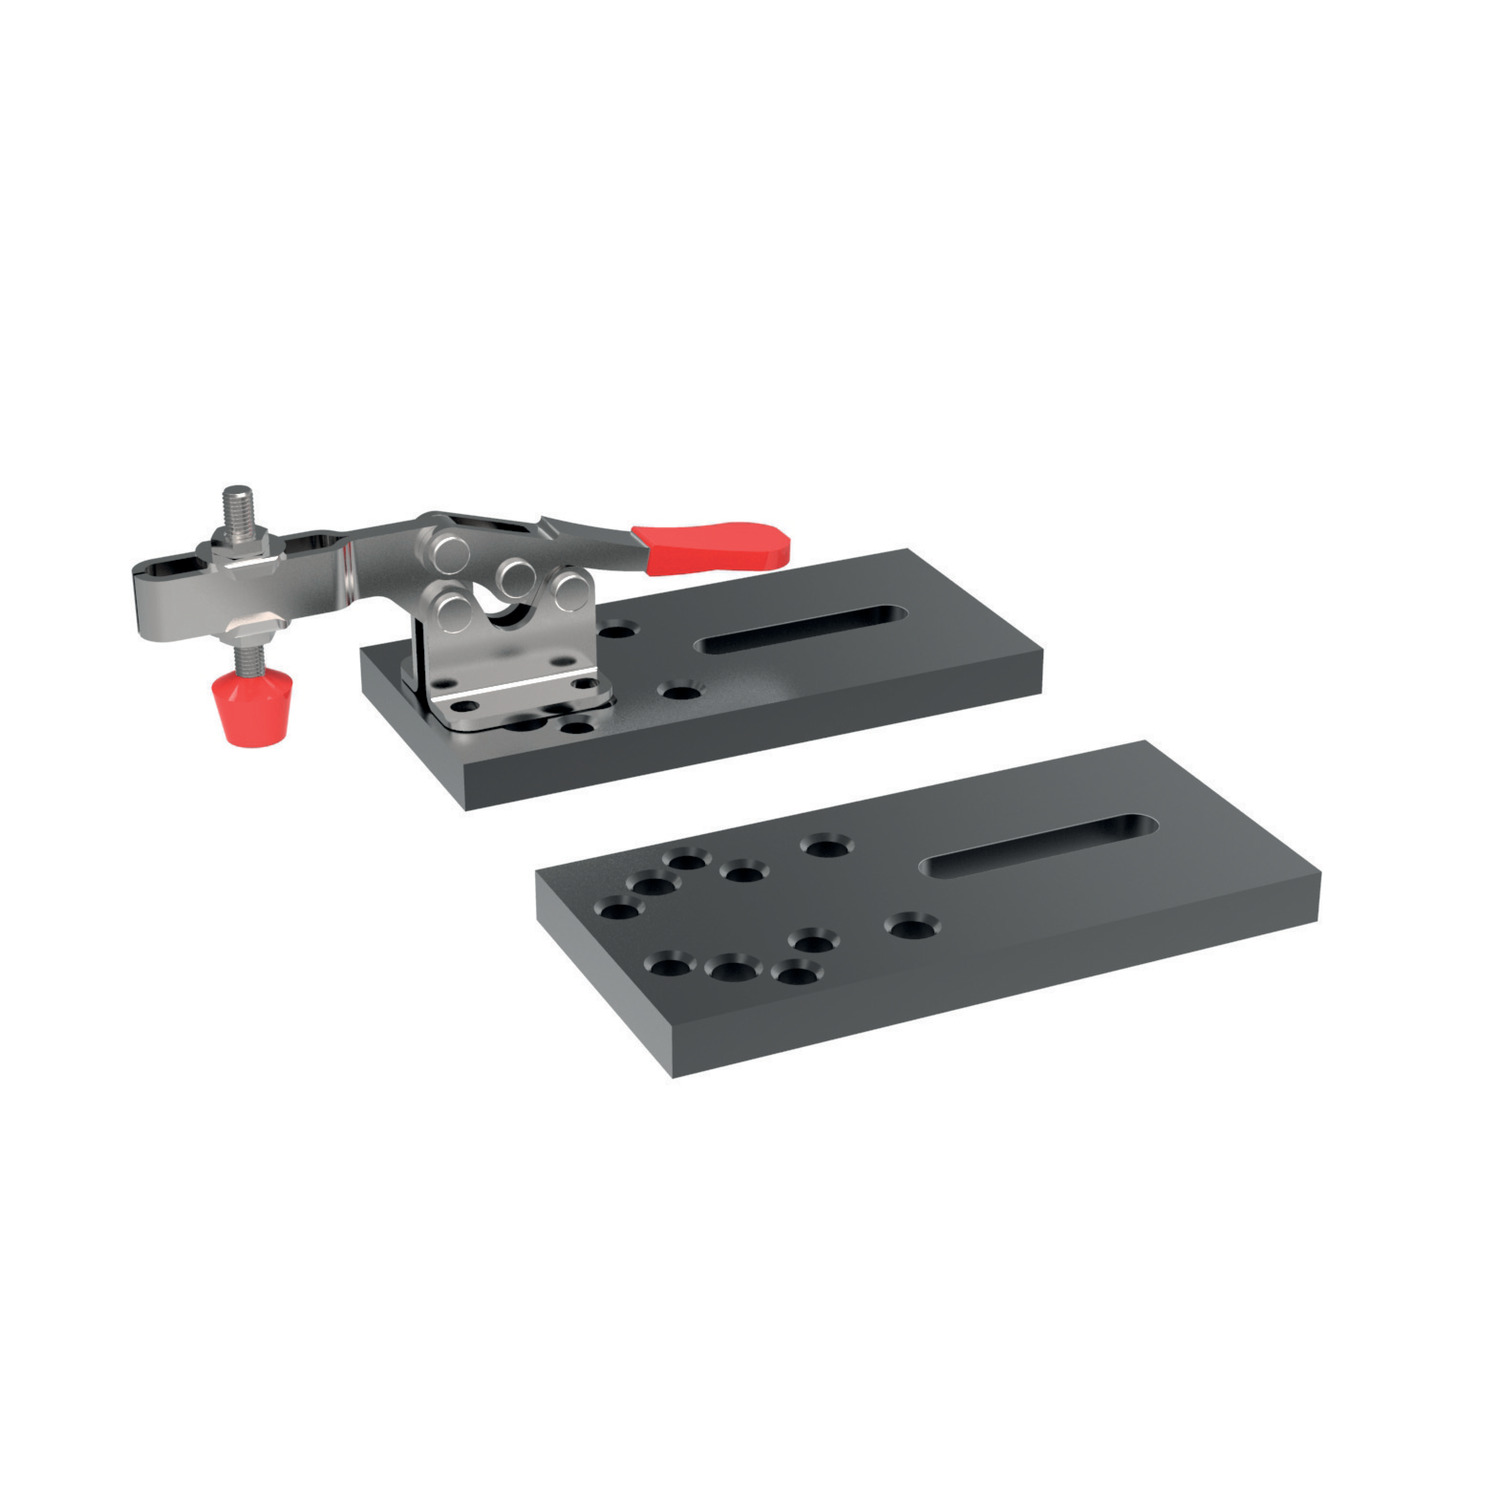 Product 19322, CMM Fixturing Toggle Clamp with mounting plate / 